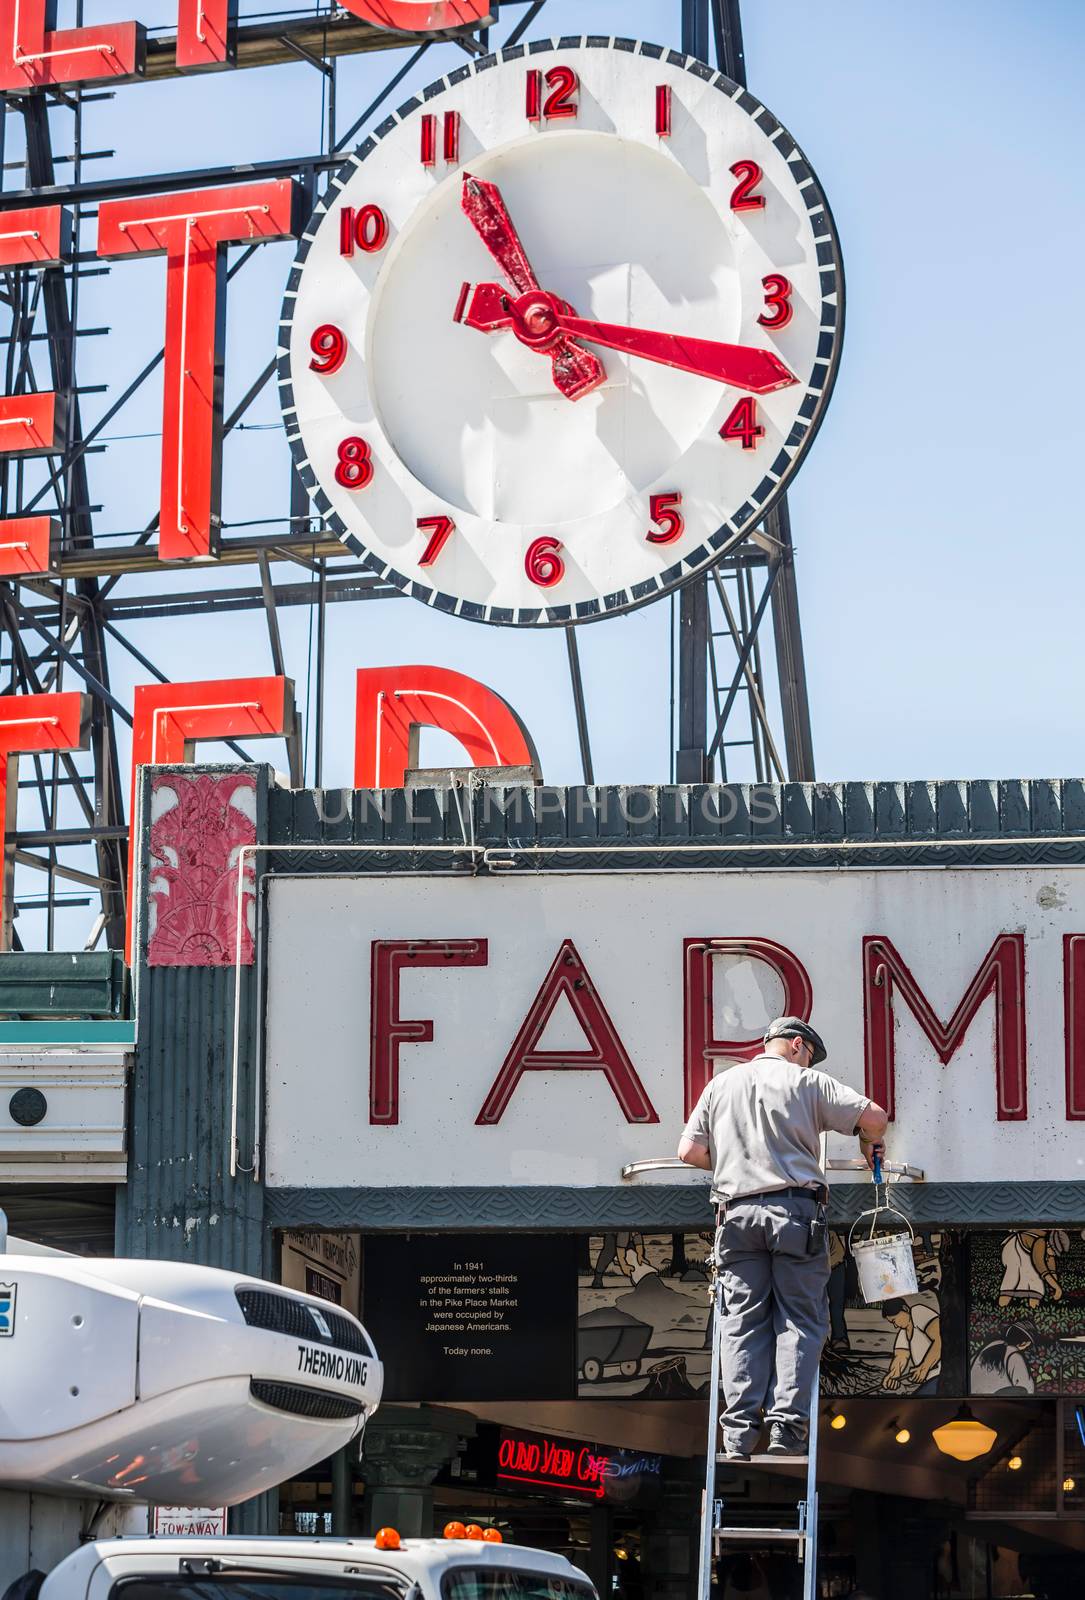 SEATTLE, WA - MAY 12: Unidentified male worker paints famous sign at Pike Place Market. May 12, 2016 in Phoenix, AZ.